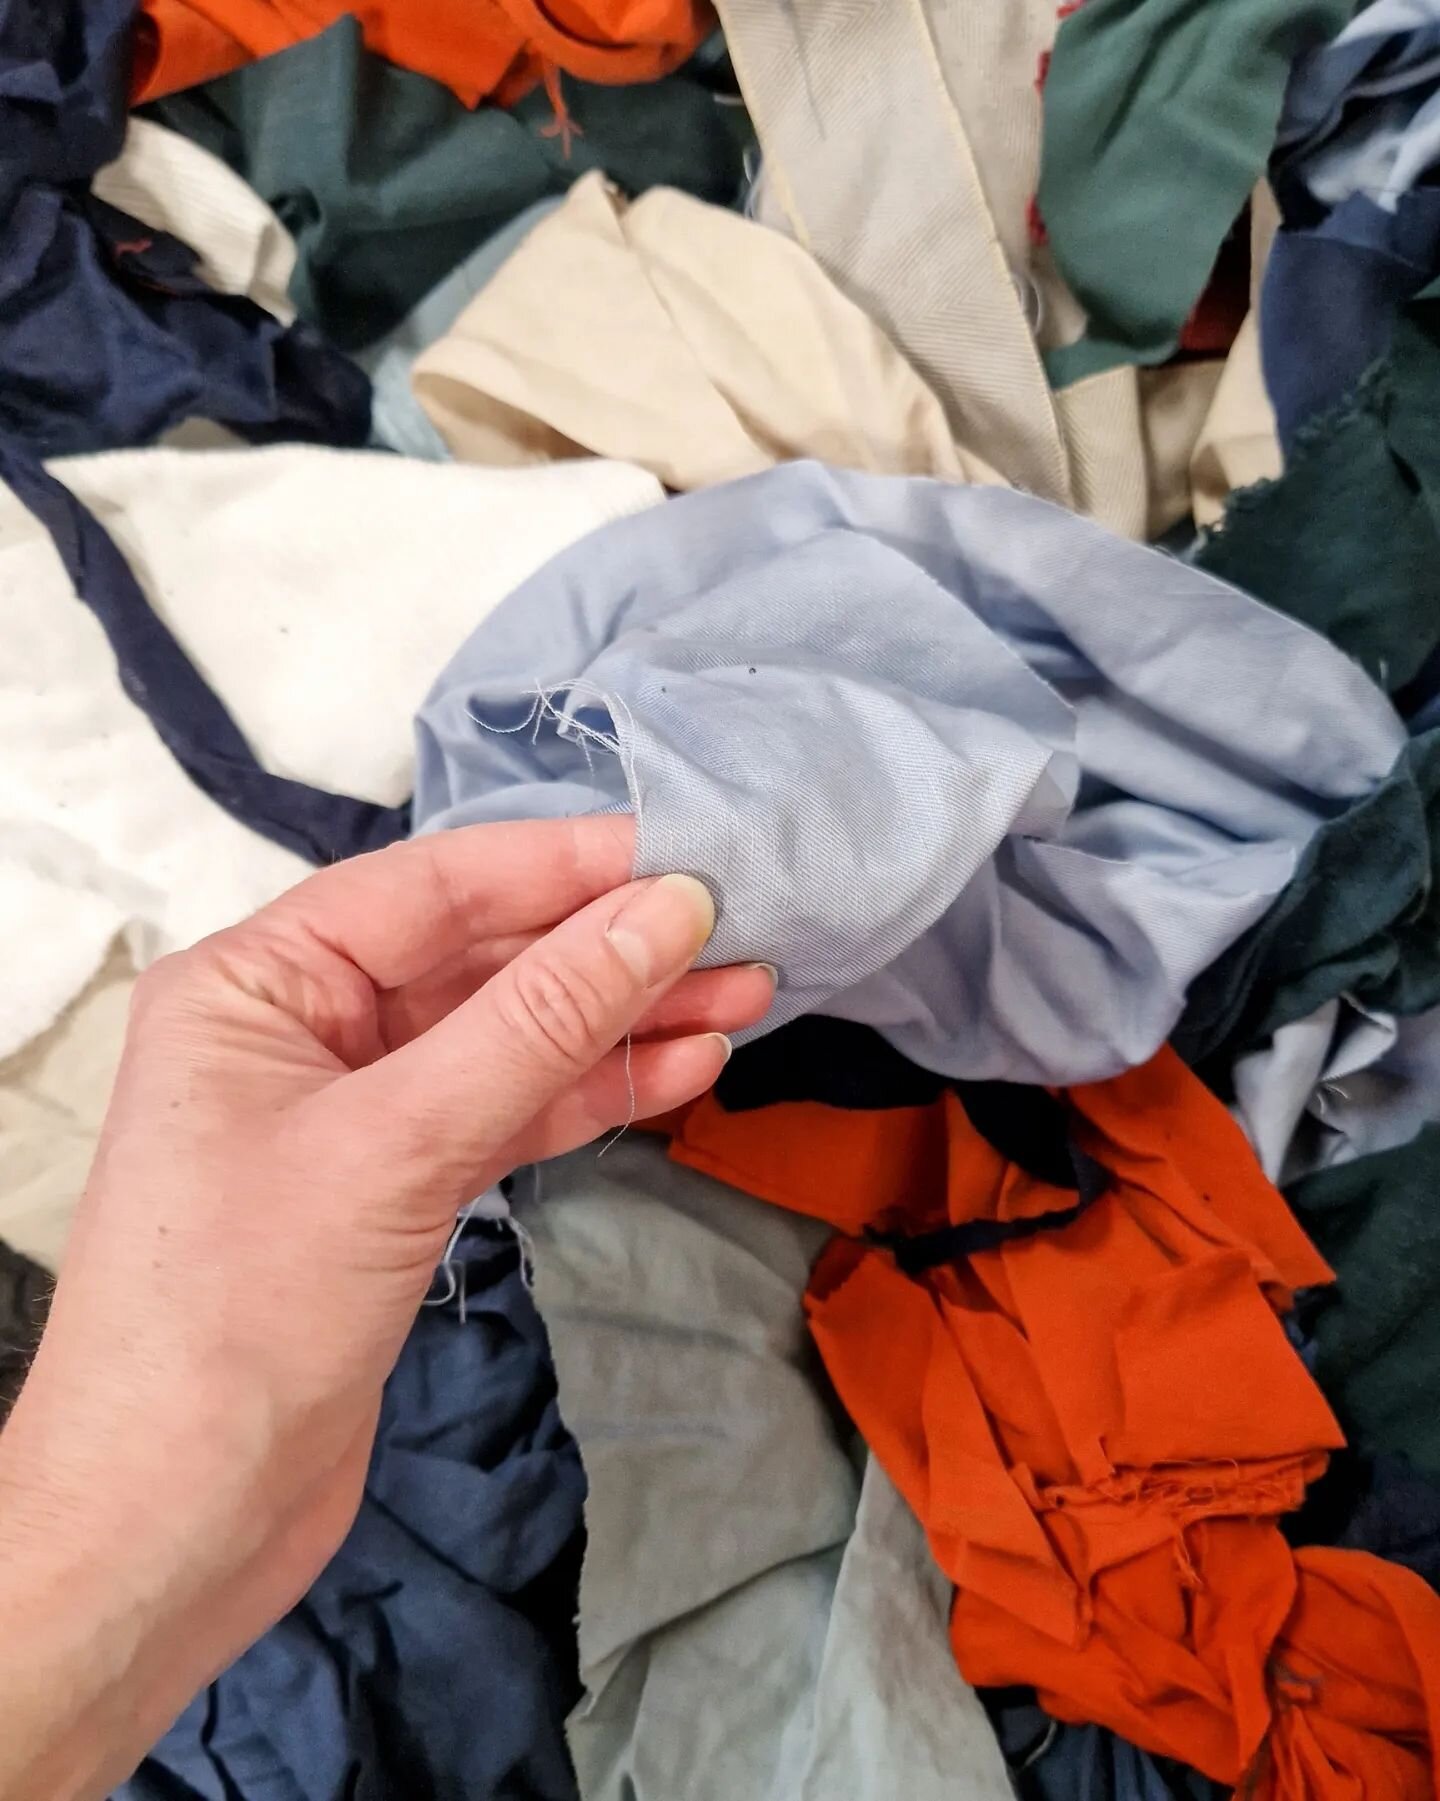 What to do with fabric/cutting waste?⁠ Check out the next photo's
⁠
In clothing production, you almost always end up with scraps. Unfortunately, this is unavoidable, but we can explore how to make the most of it. Here's what we do with them:⁠
⁠
Photo